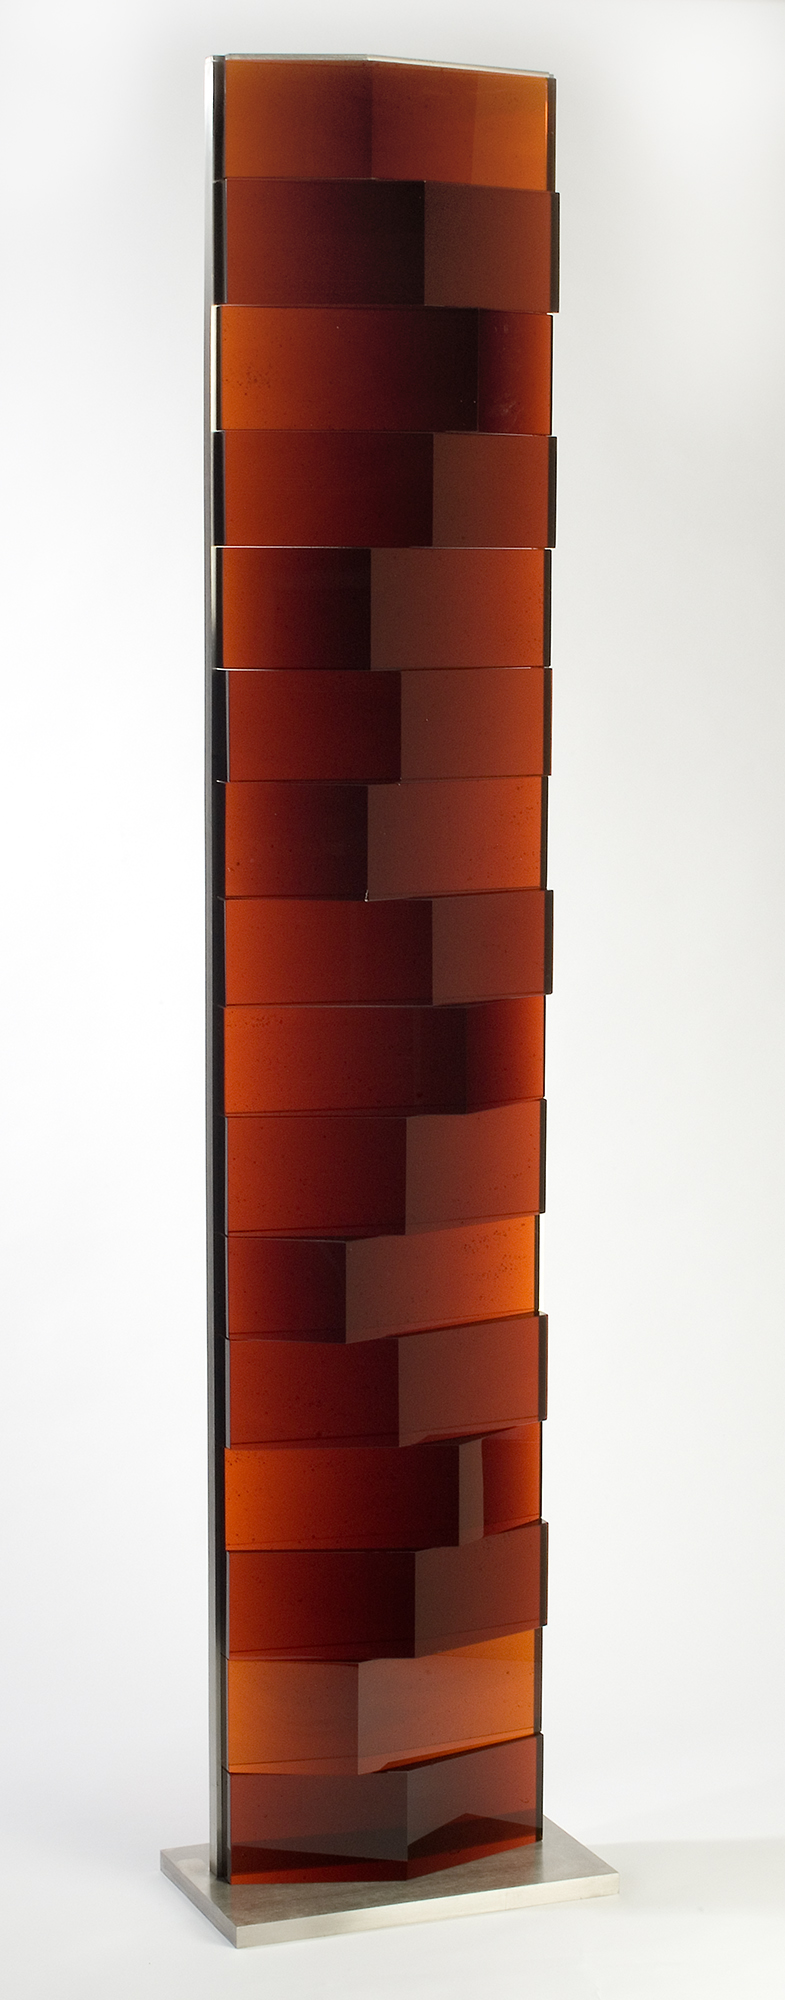 The sculpture has a stainless steel rectangular base from which vertical supports hold blocks of dark red glass stacked one on top of another. The blocks of glass are rectangular with a triangular projection that varies in size at the front of each block.